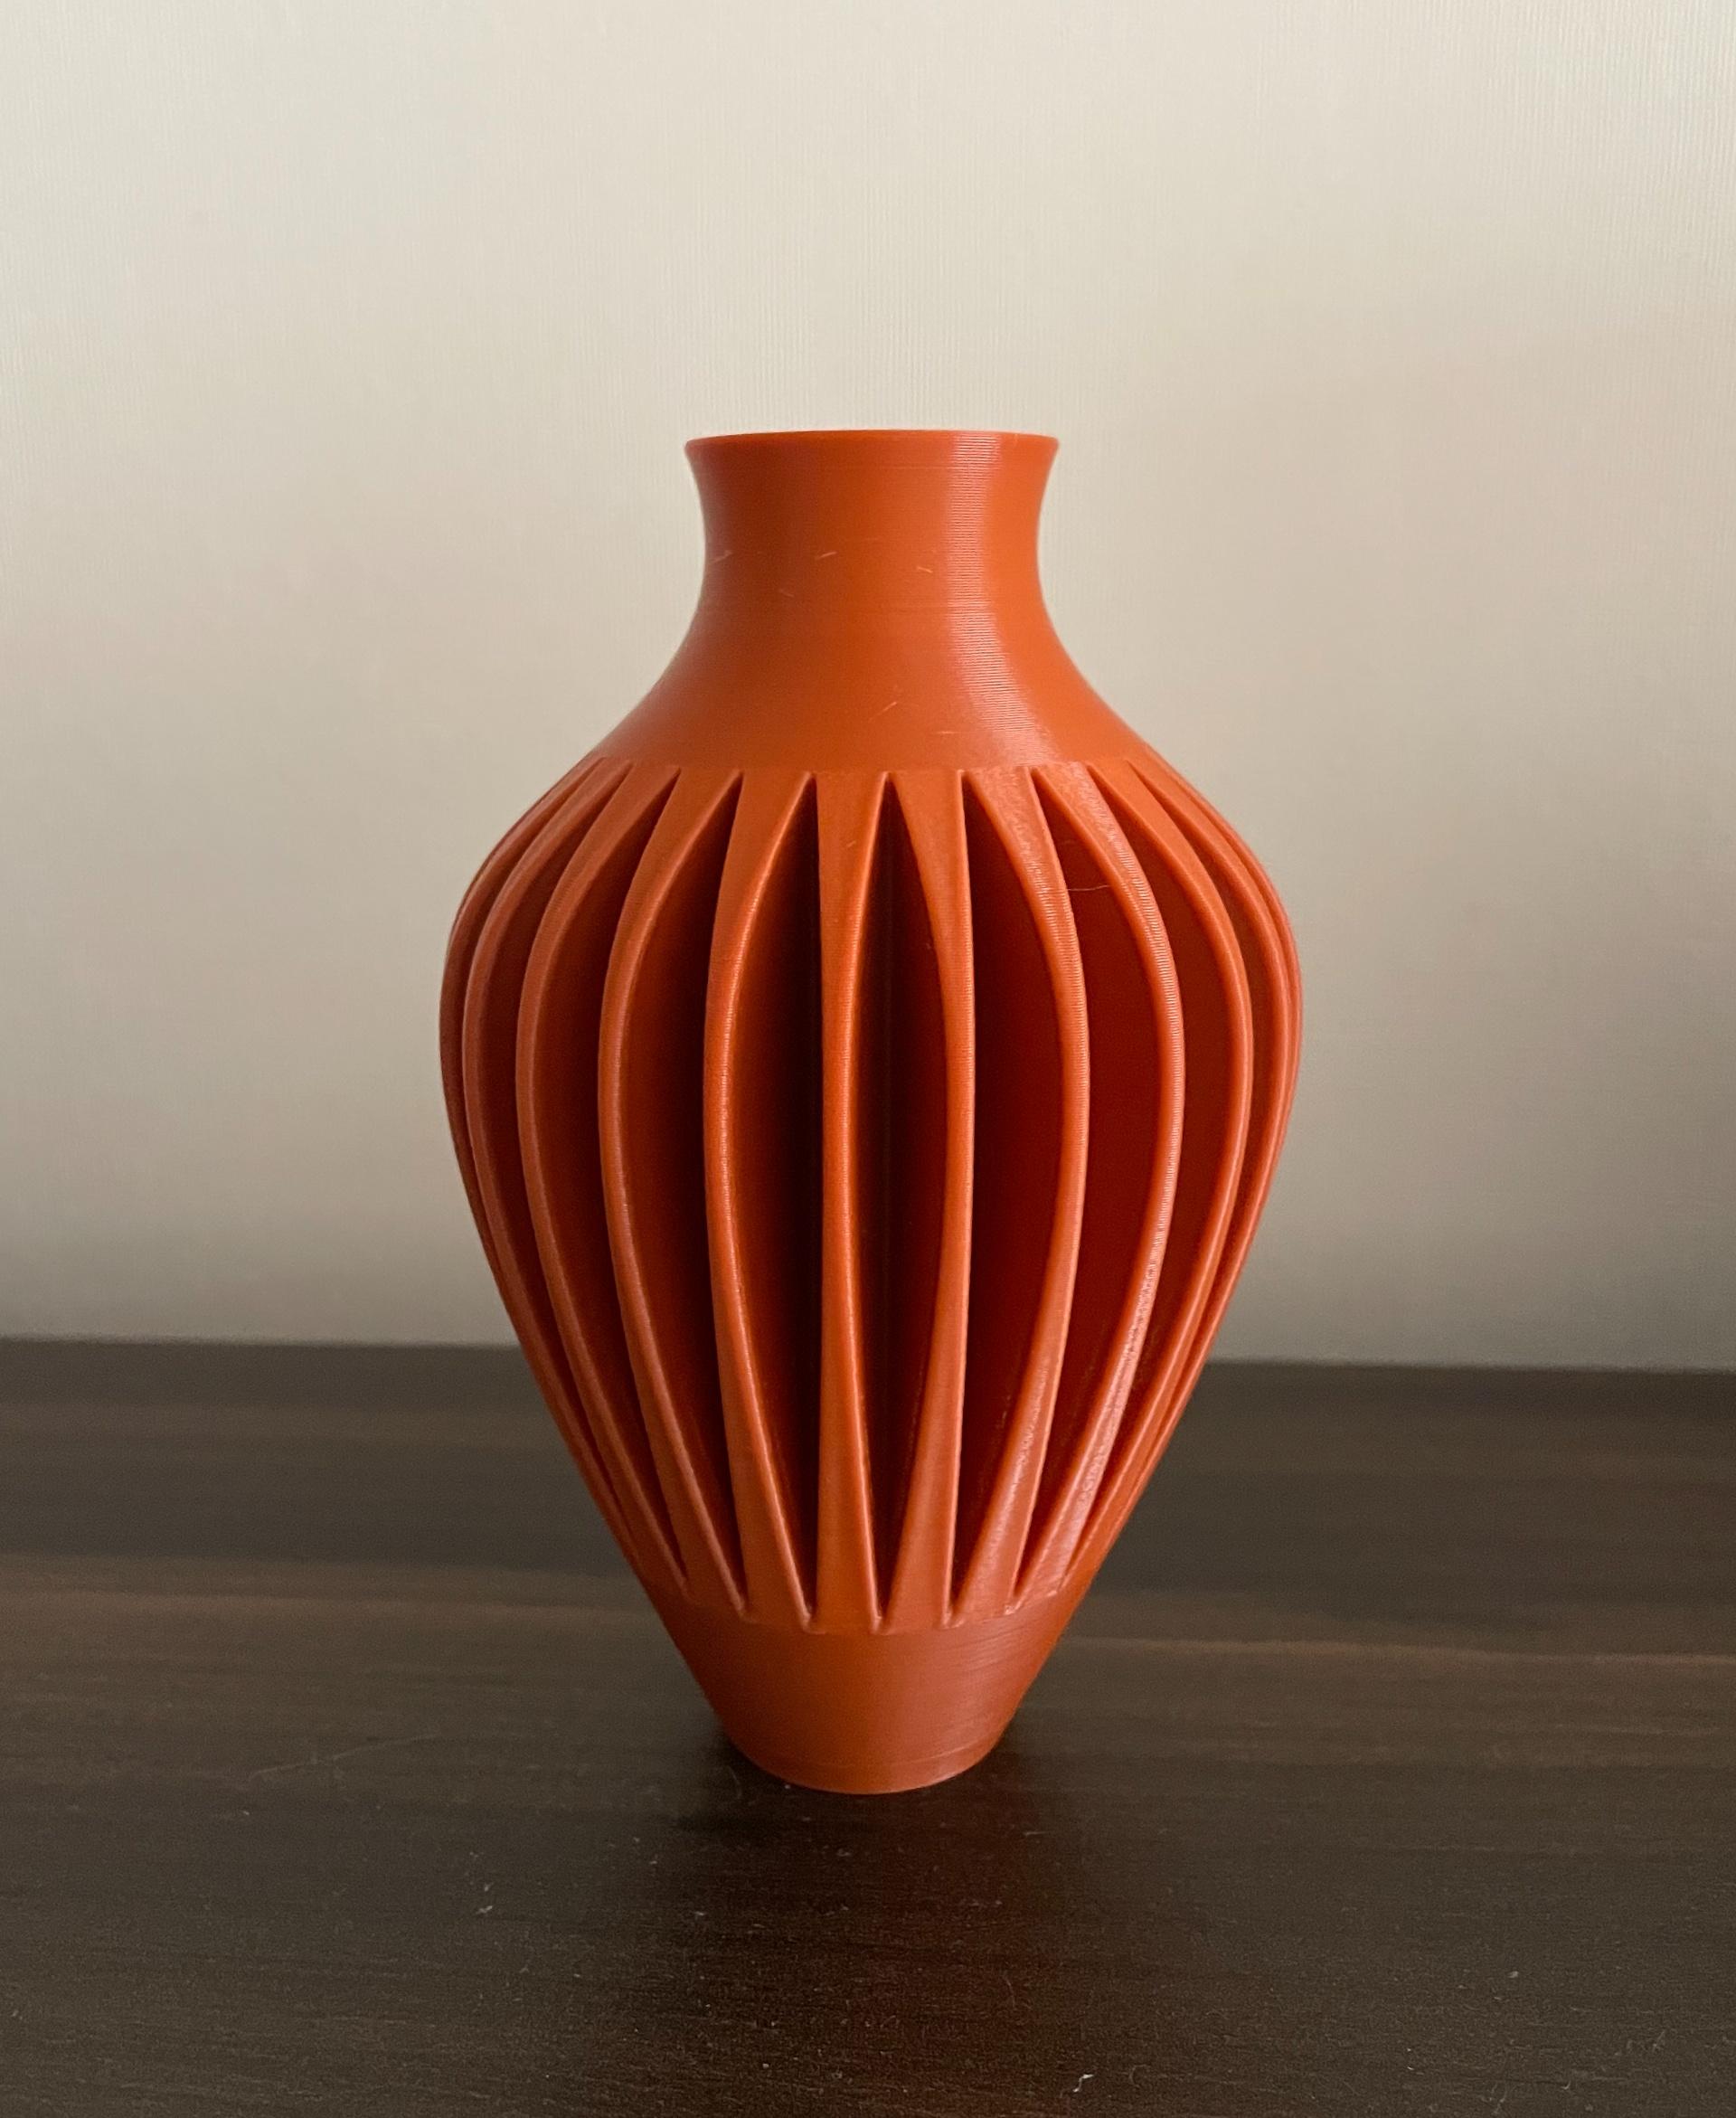 Vase No. 2 - These are amazing! - 3d model